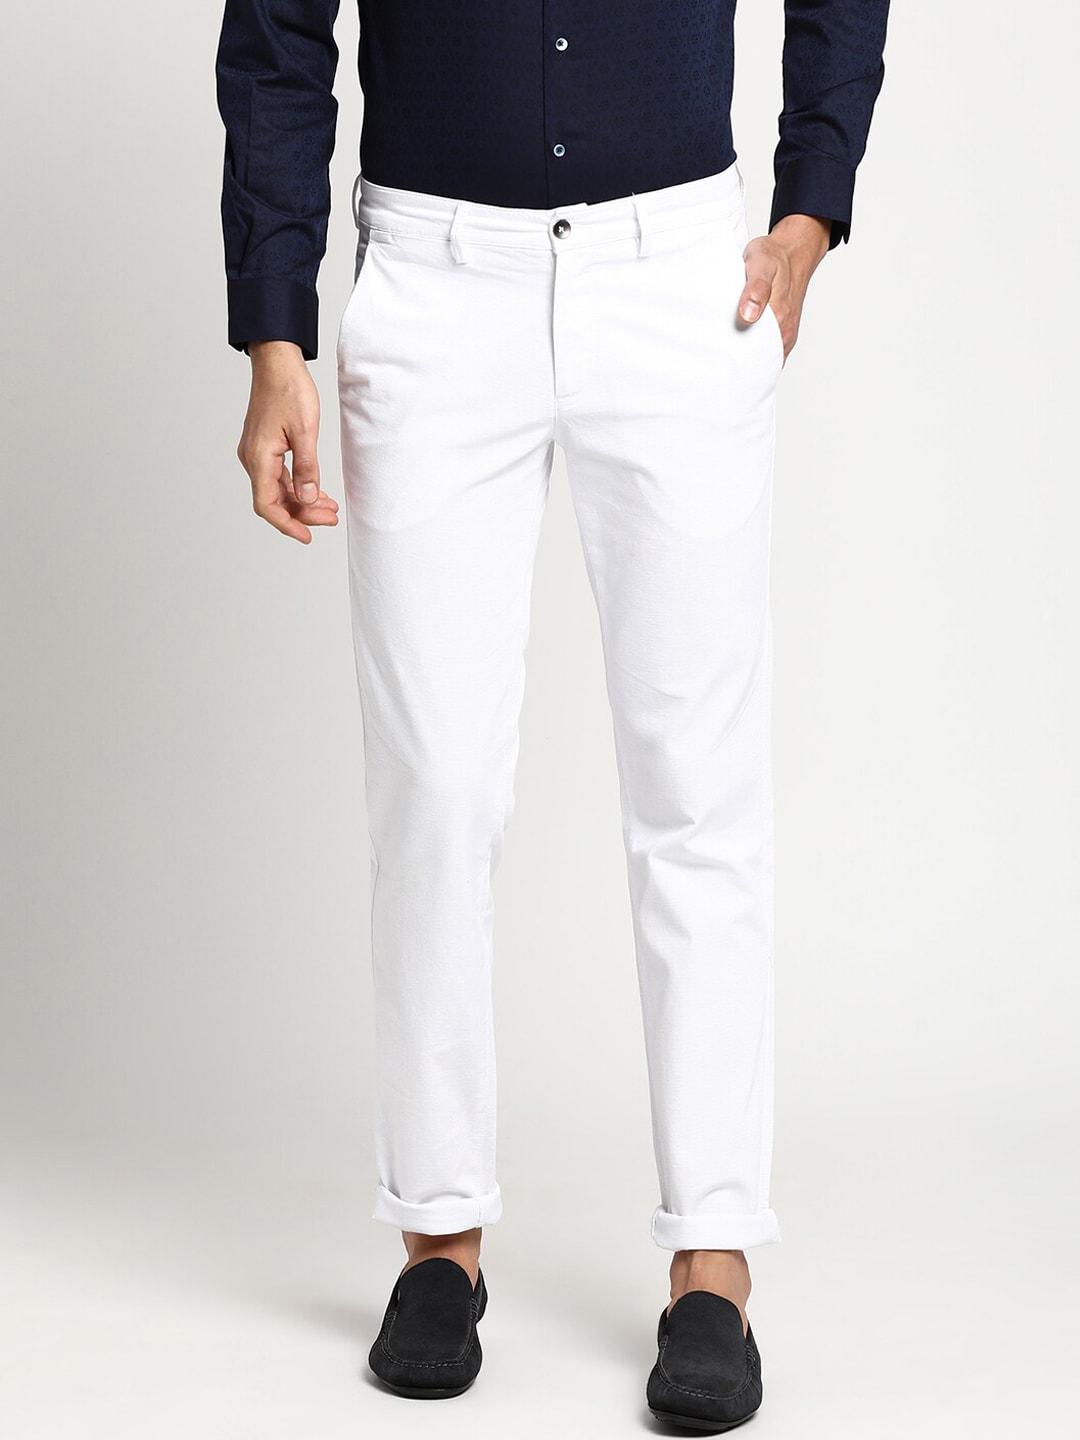 turtle men white solid cotton skinny fit chinos trousers